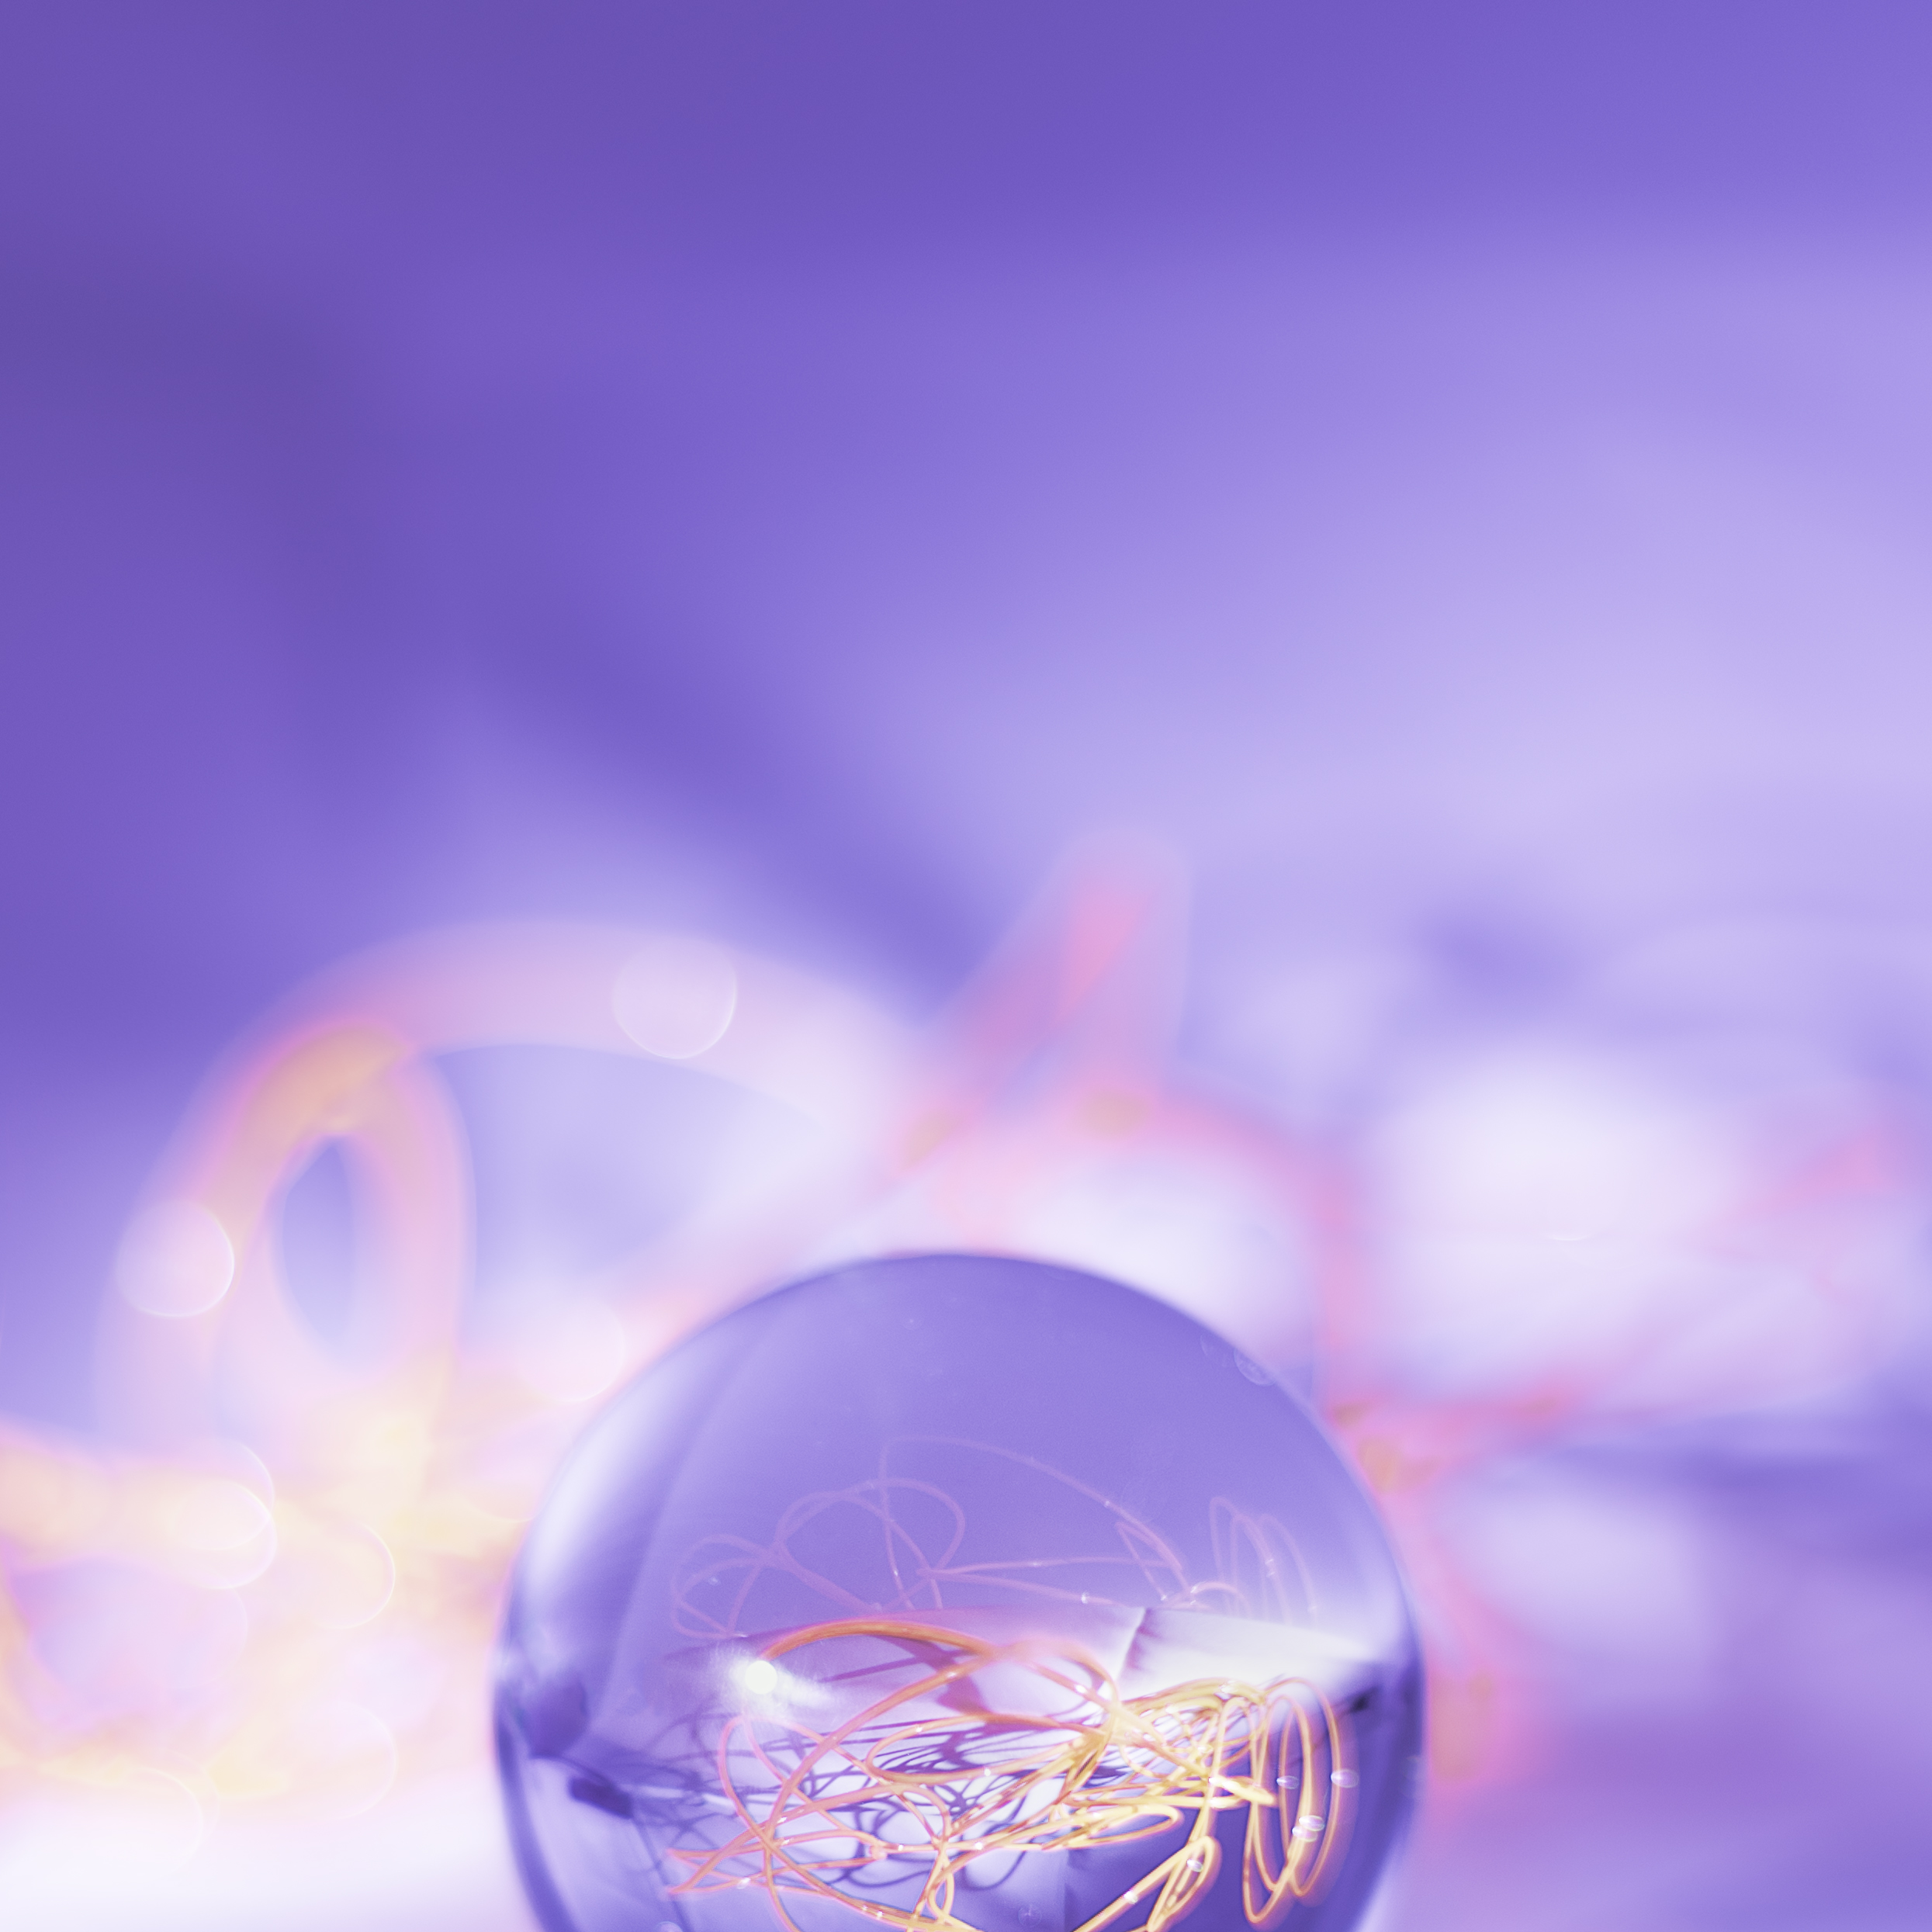 ball, crystal, purple, violet, reflection, macro lock screen backgrounds